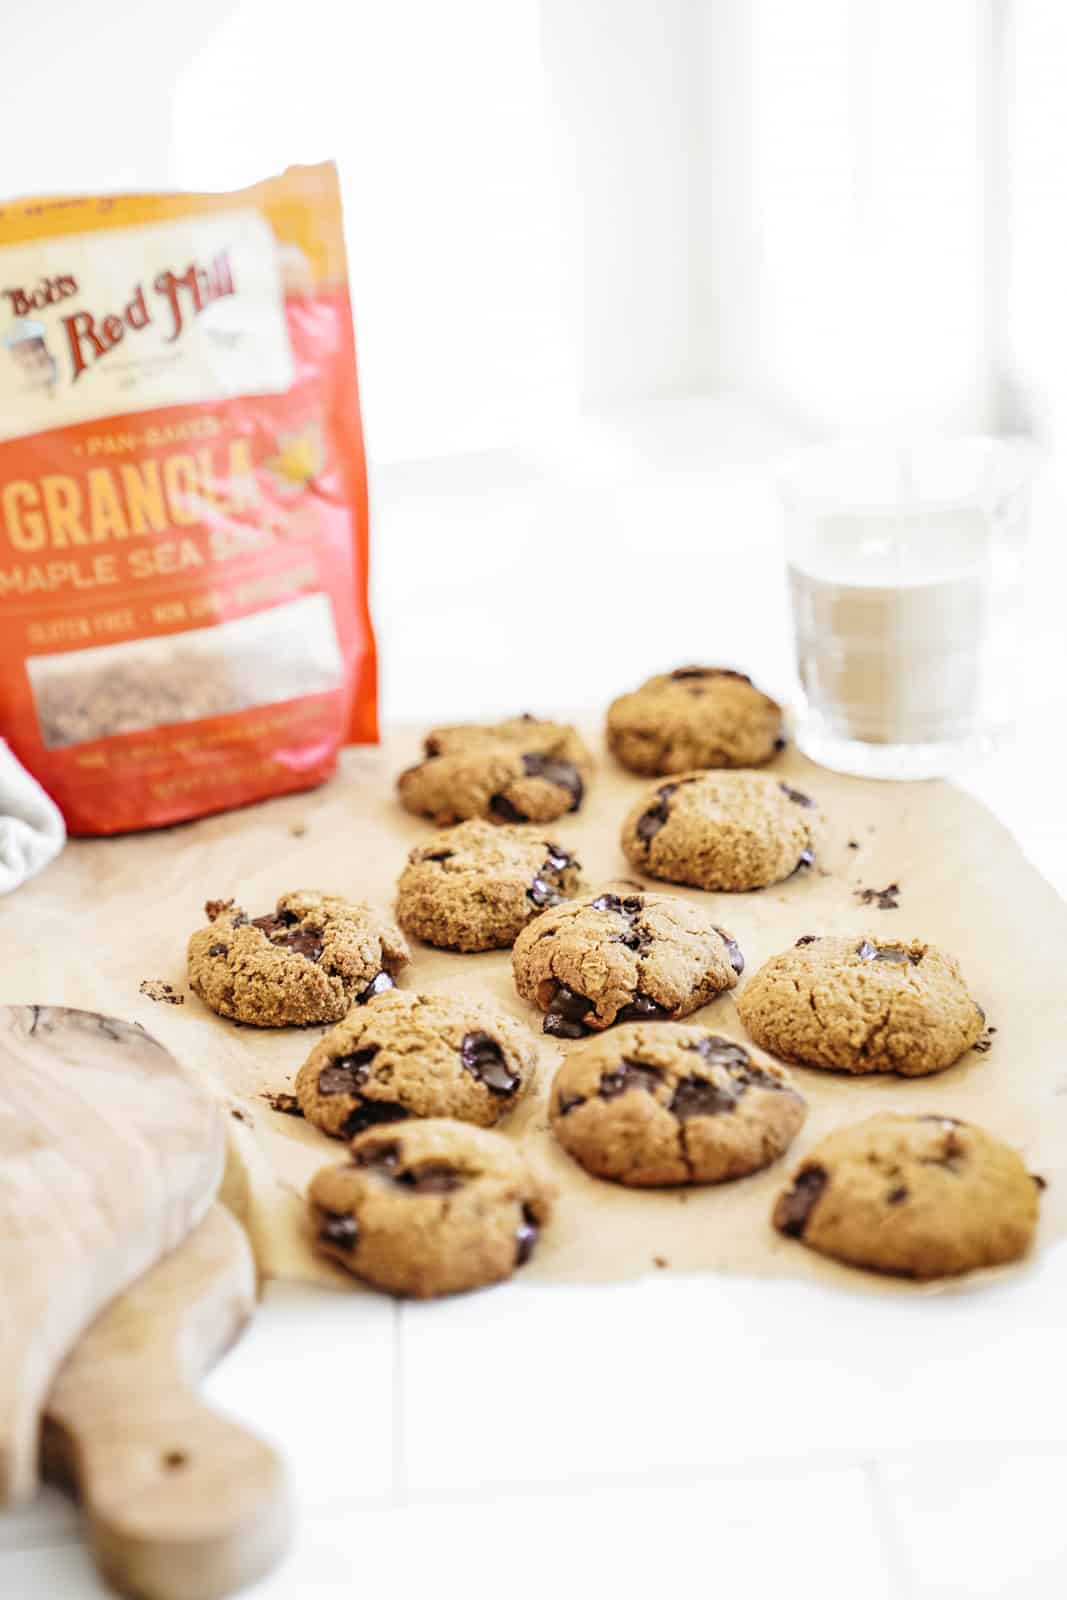 Granola Chocolate Chip Cookies scattered on counter with bag of Bob's Red Mill Granola